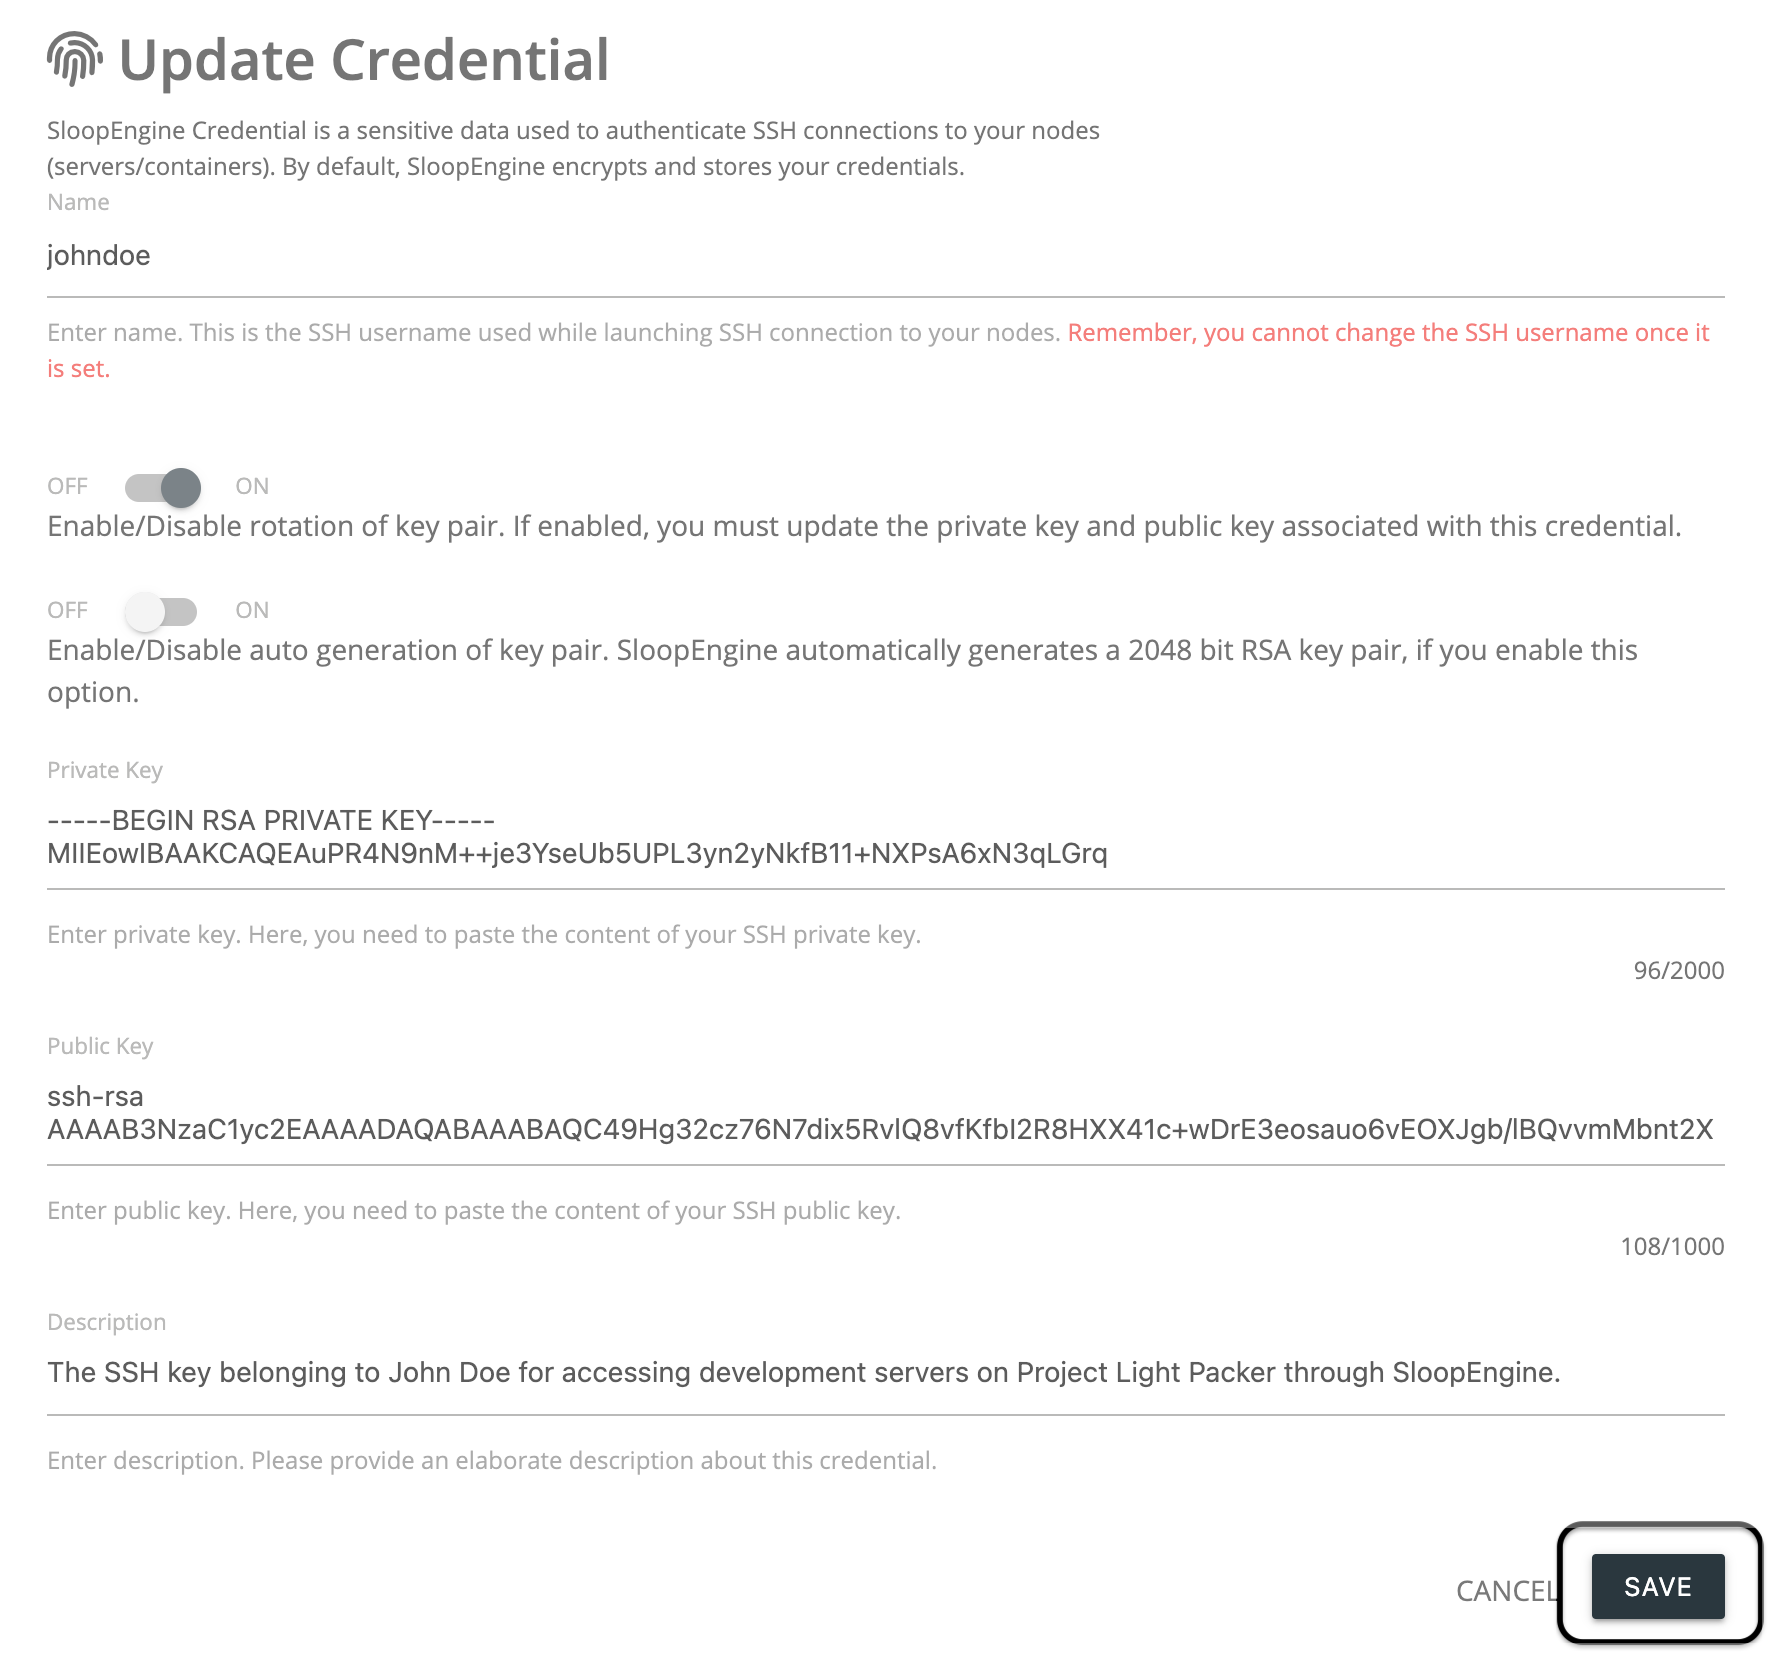 Screenshot of credential updation form with valid information.